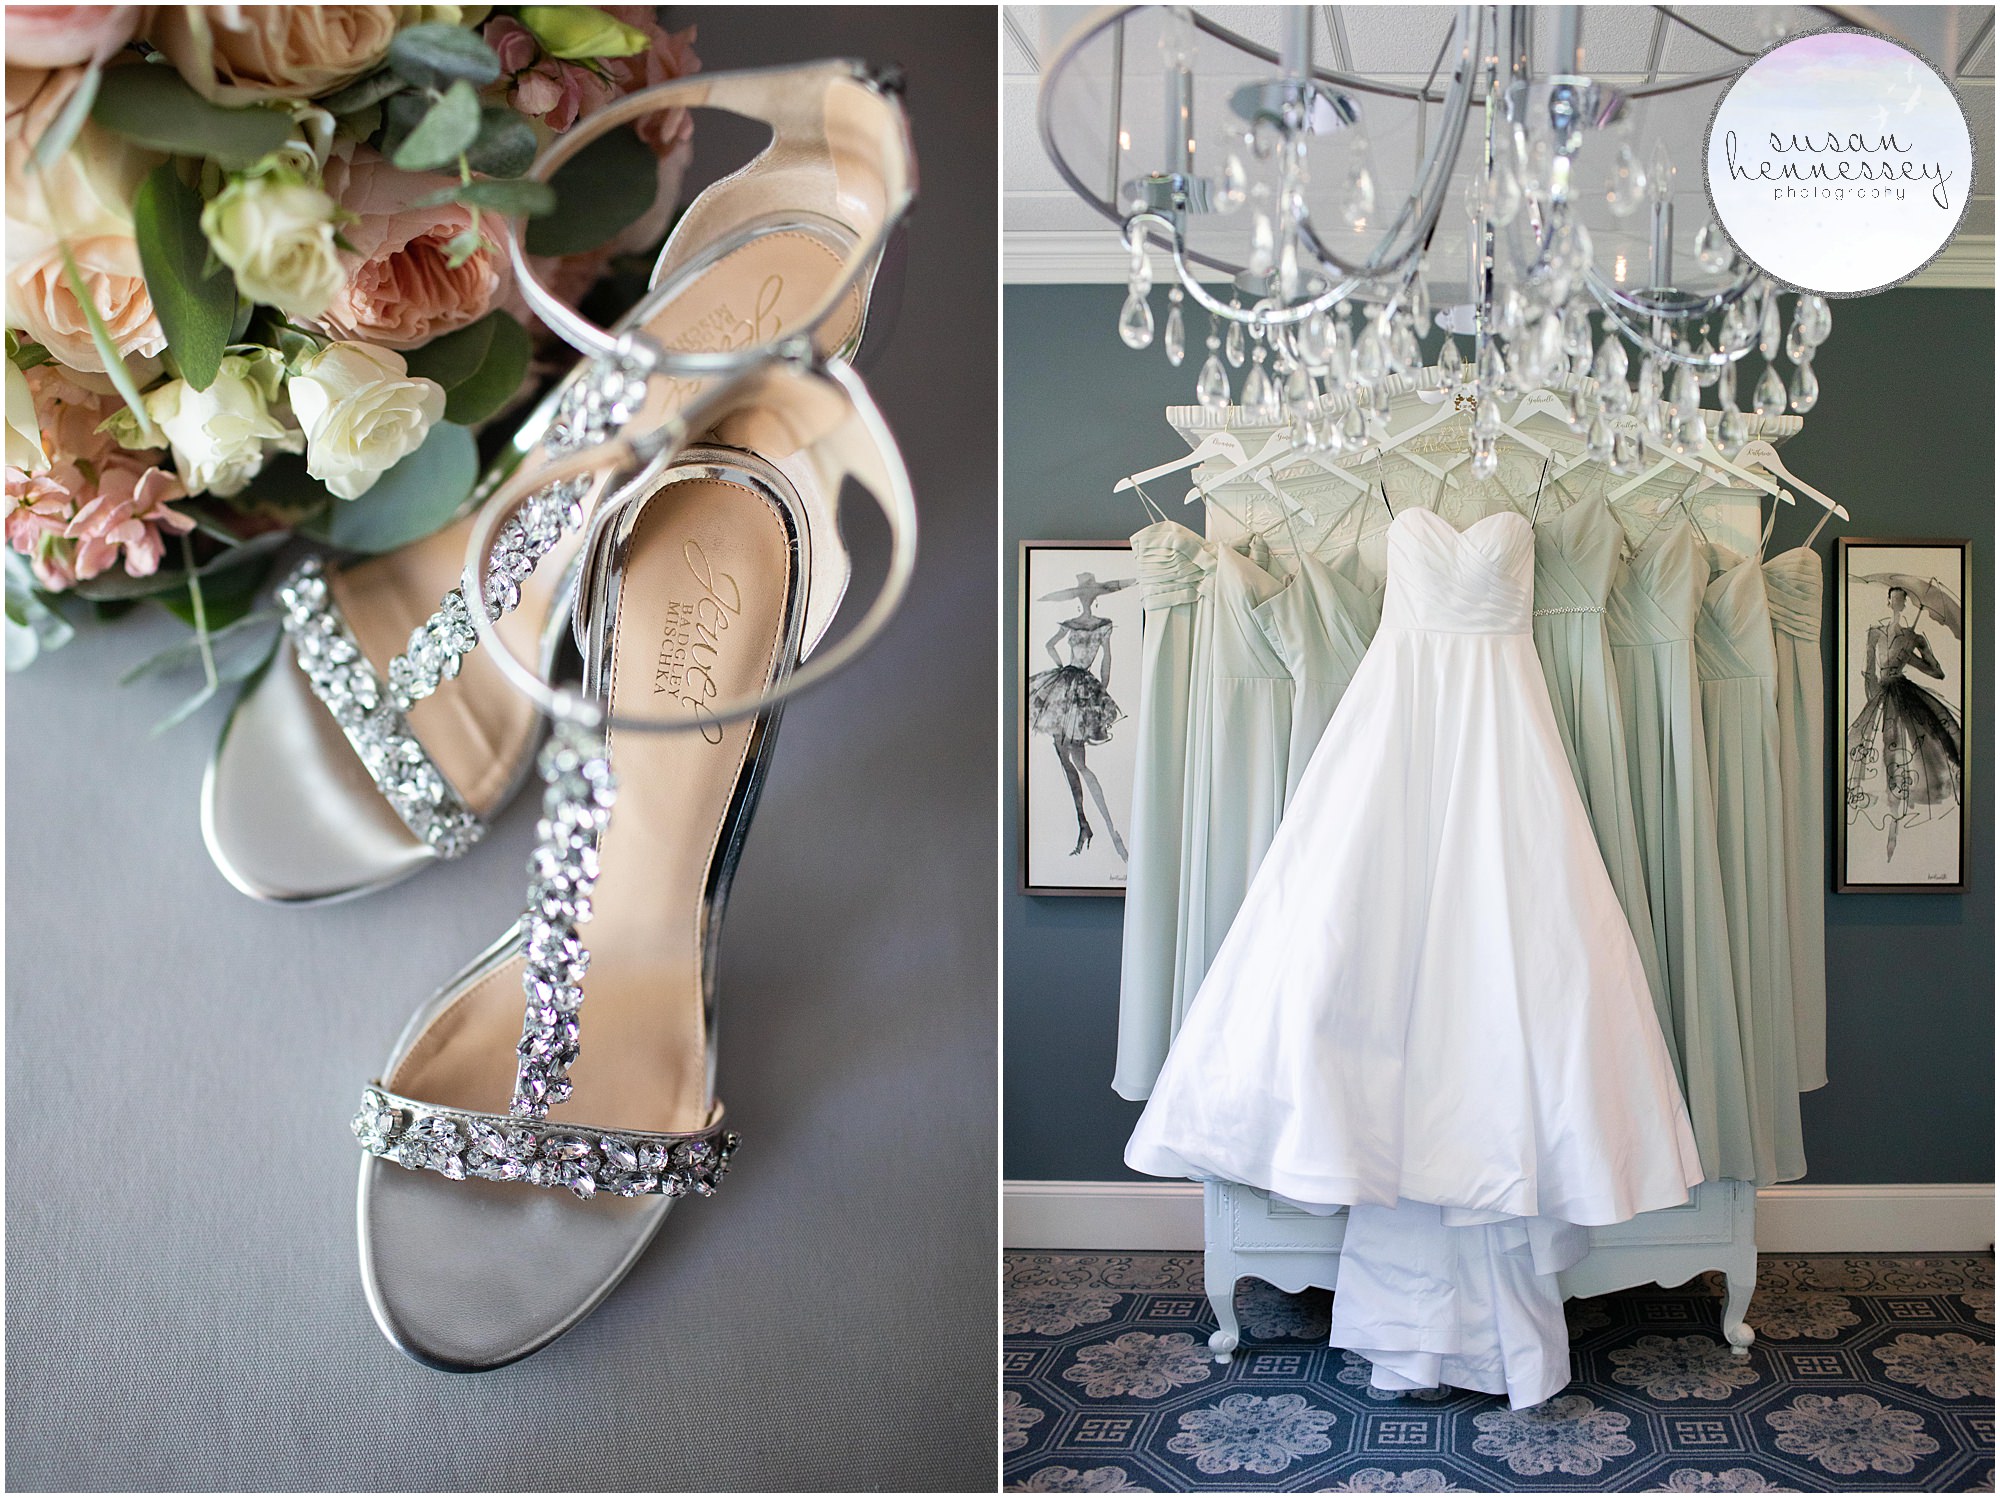 Bride's shoes, bouquet and bridesmaid and bridal dresses